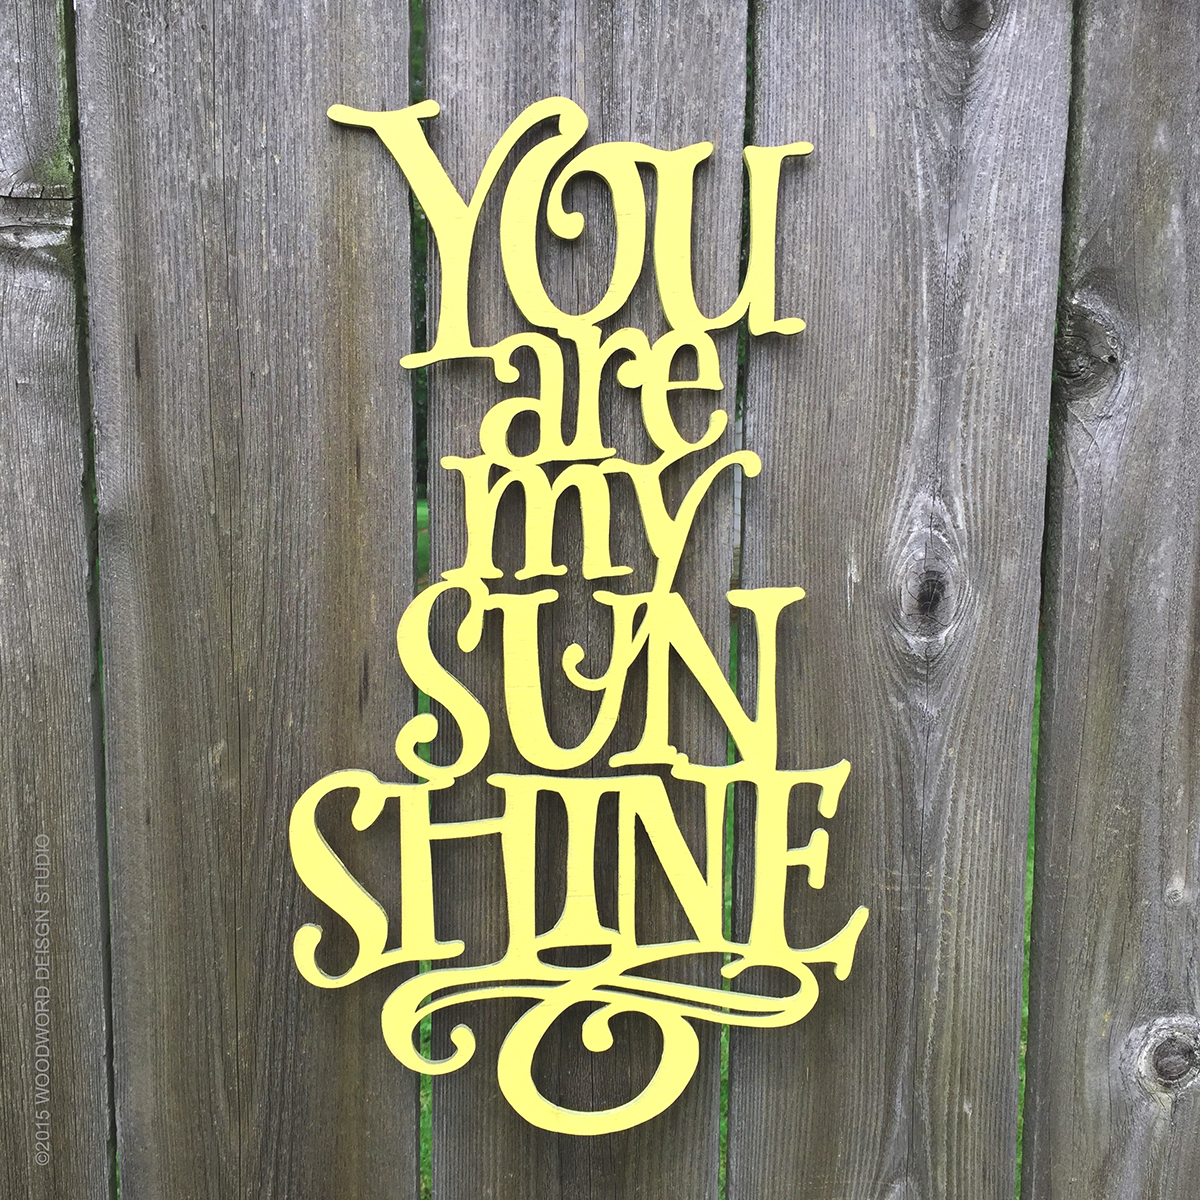 You are my sunshing.jpg